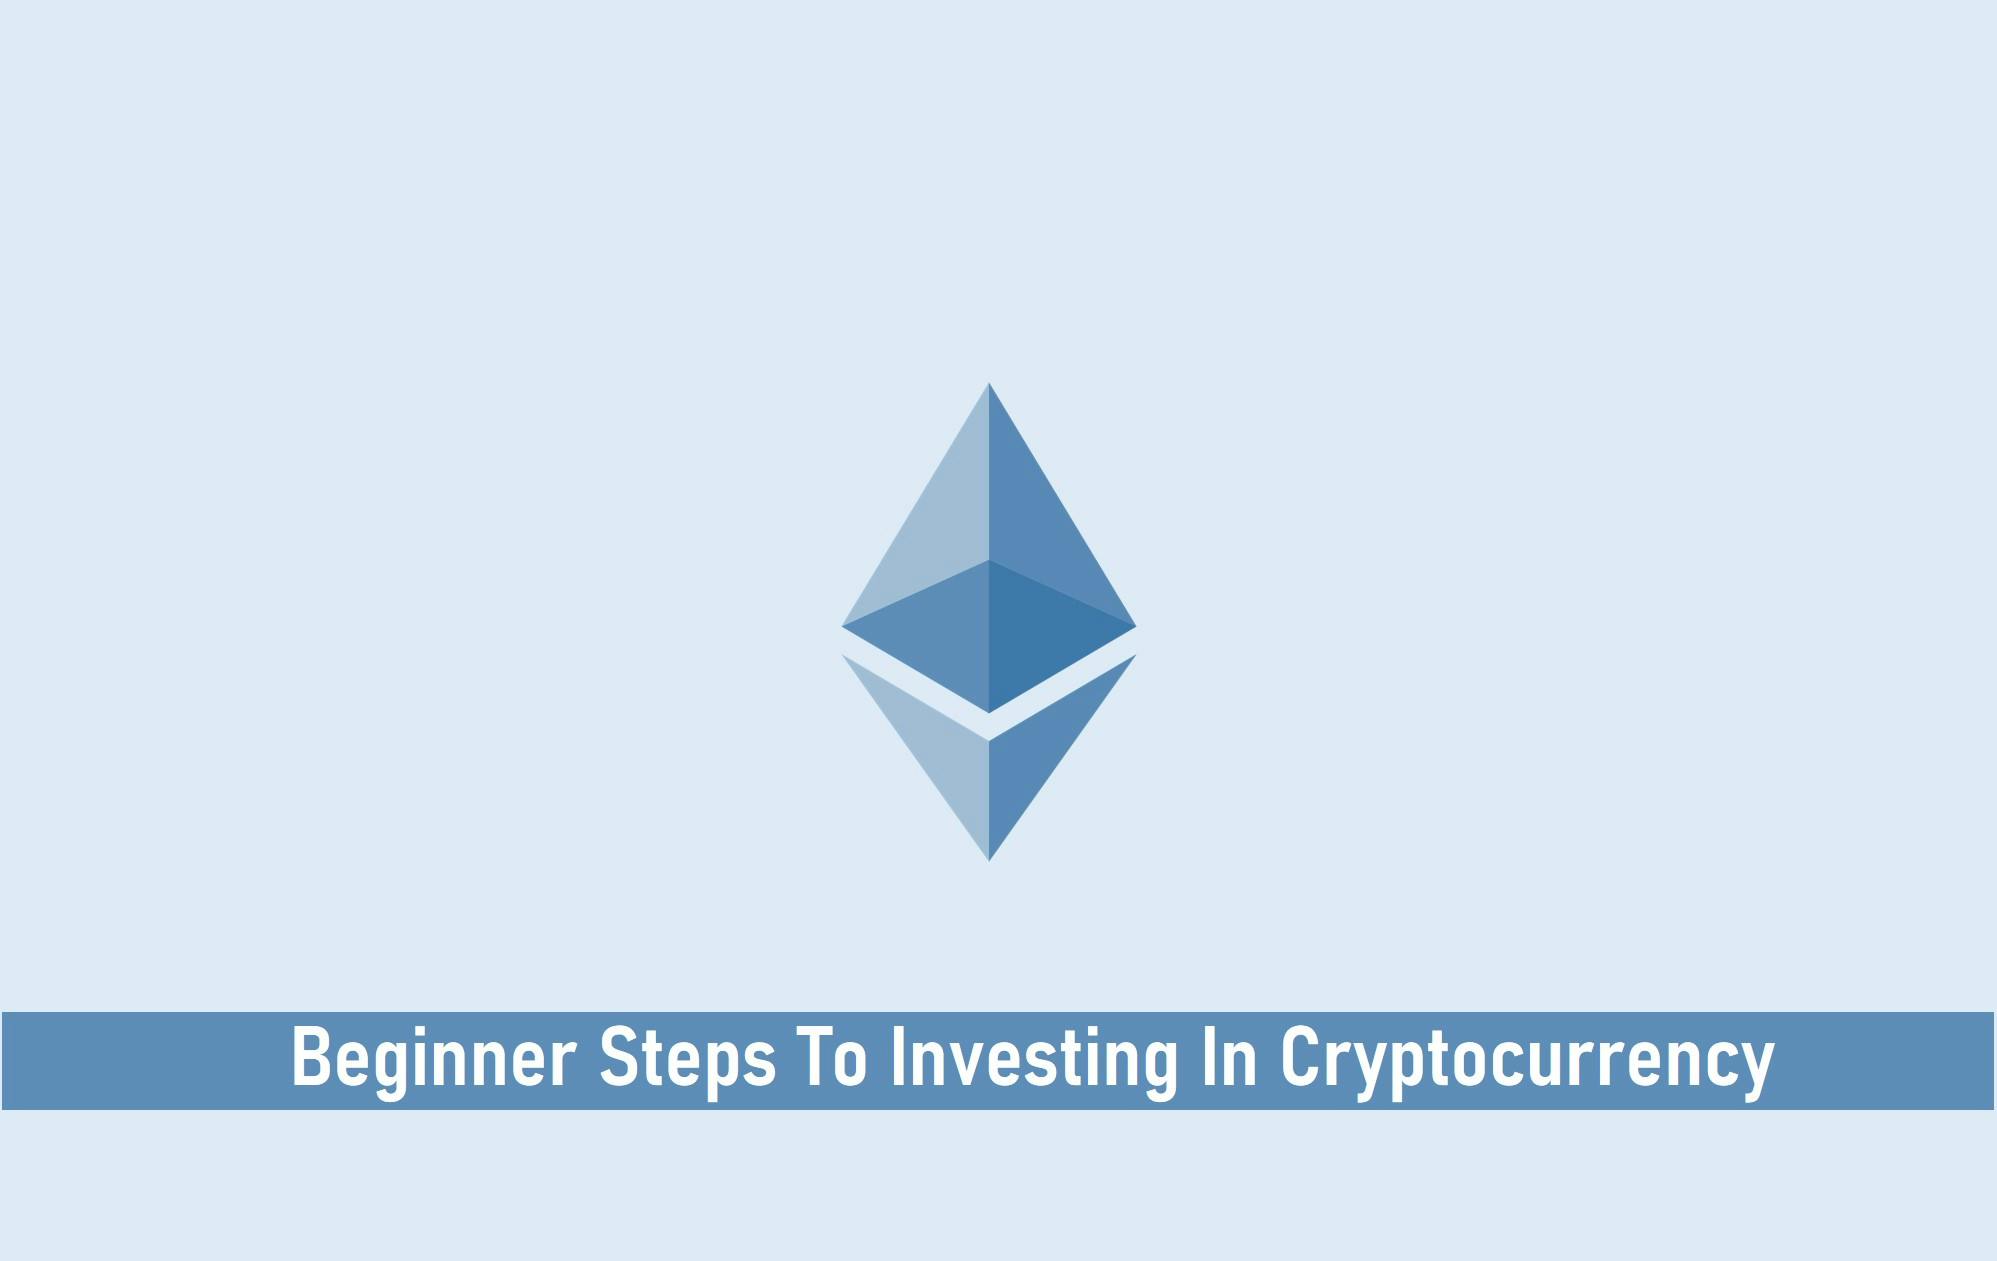 6 Beginner Steps To Investing In Cryptocurrency